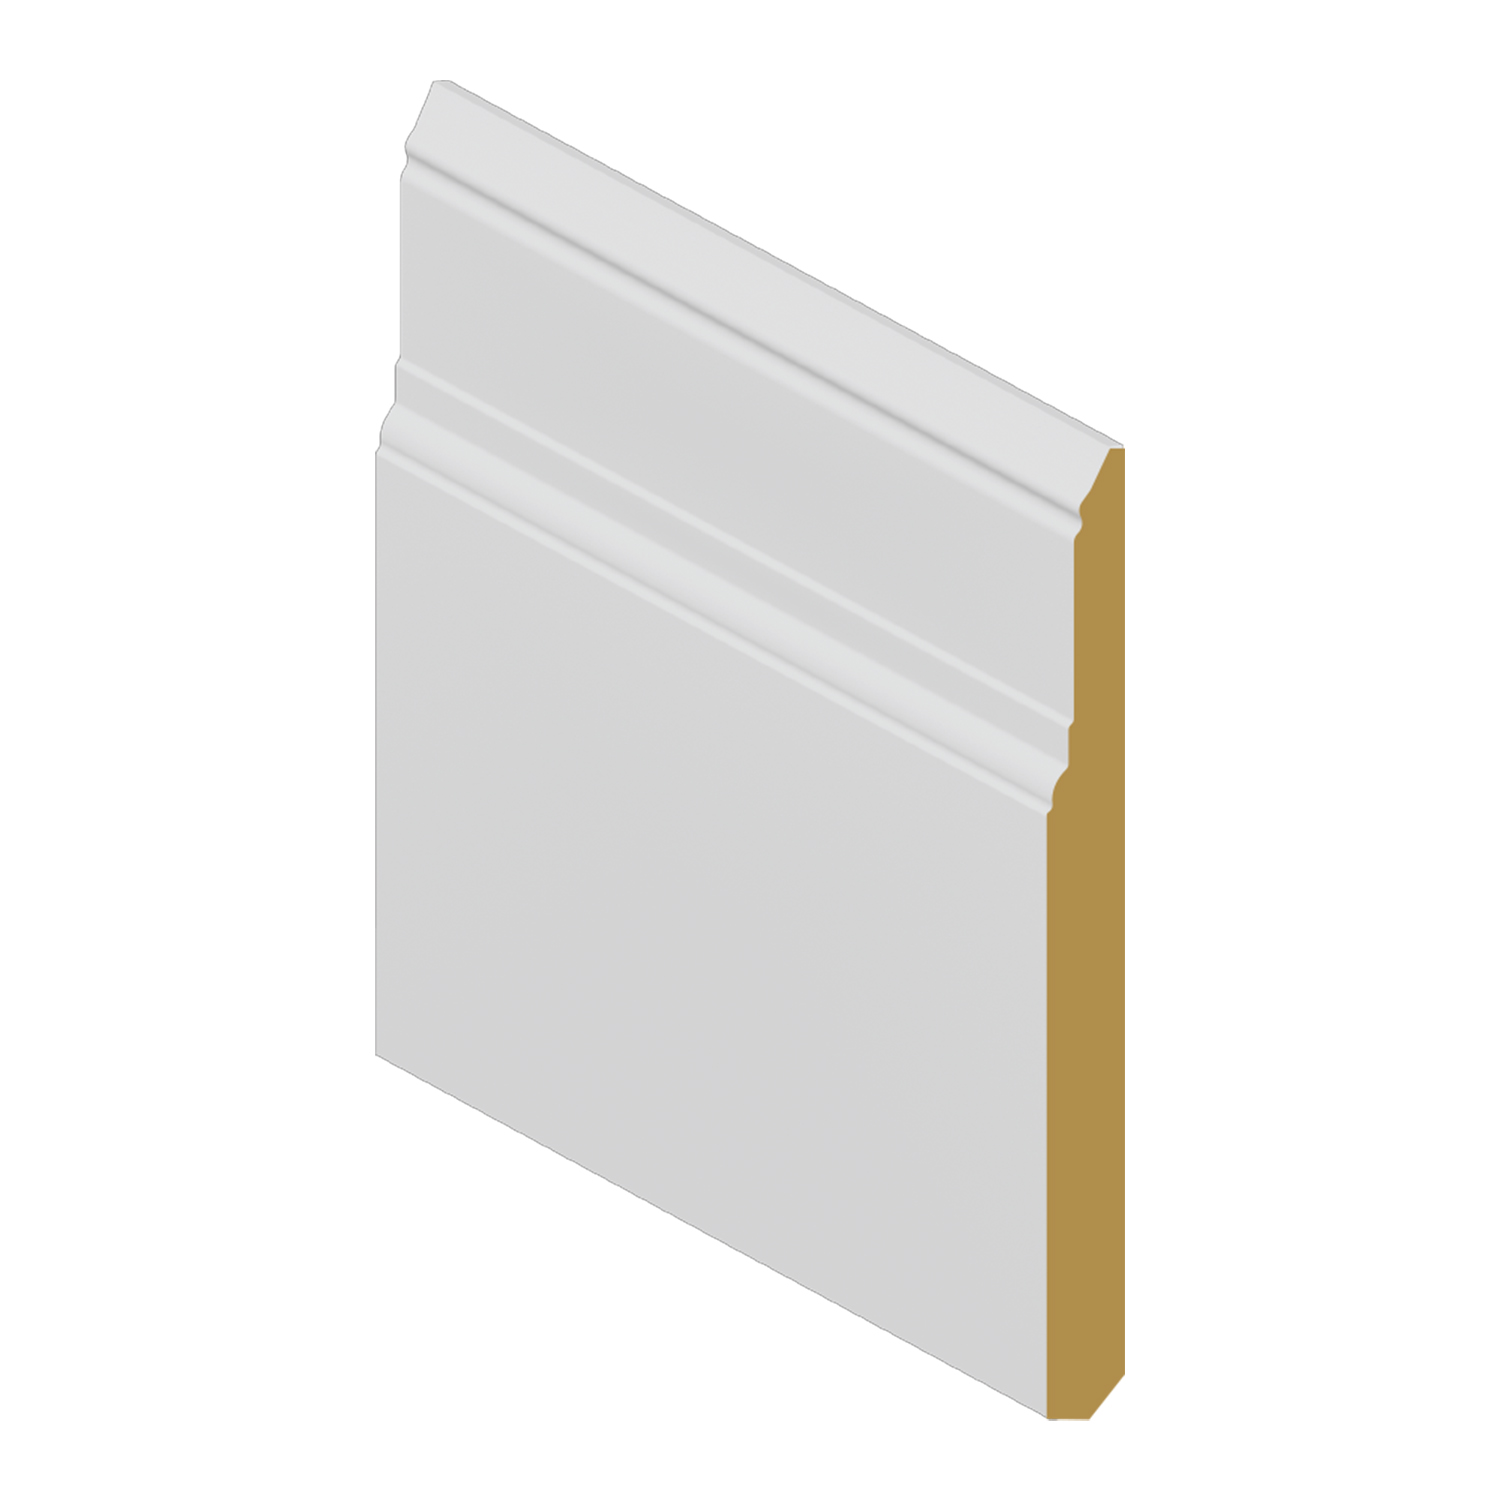 Base Board MDF Contemporary Step 7 1/4 x 5/8 x 12' - $1.66/LF -  SOLD PER PIECE - EACH PIECE IS 12' - $20 EACH